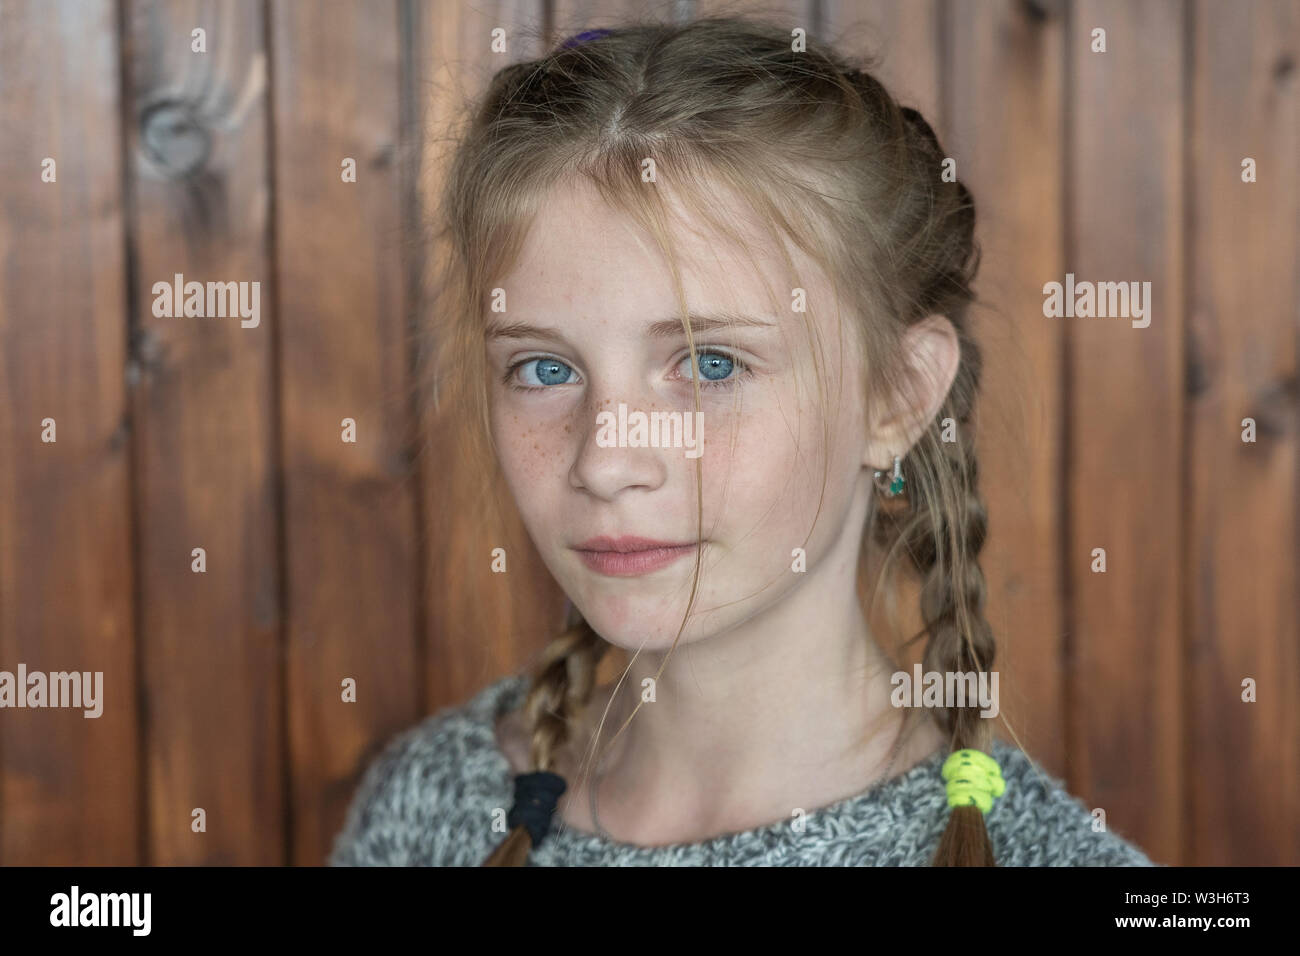 Beautiful blonde young girl with freckles indoors on wooden background, close up portrait Stock Photo